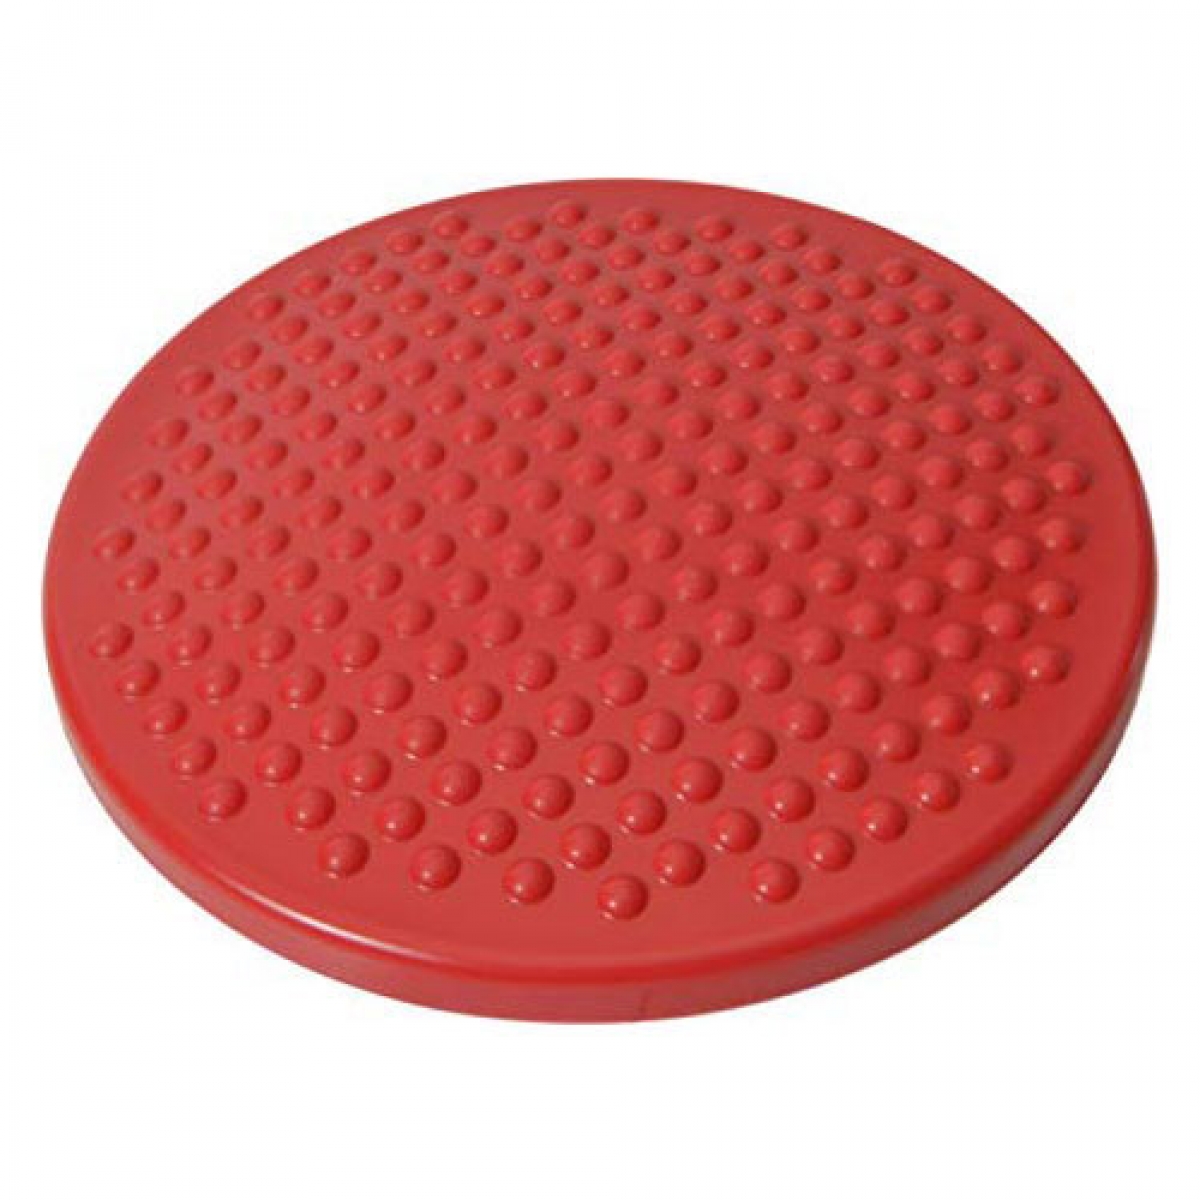 Disc O Sit Inflatable Seating and Balance Cushion - 15 inch